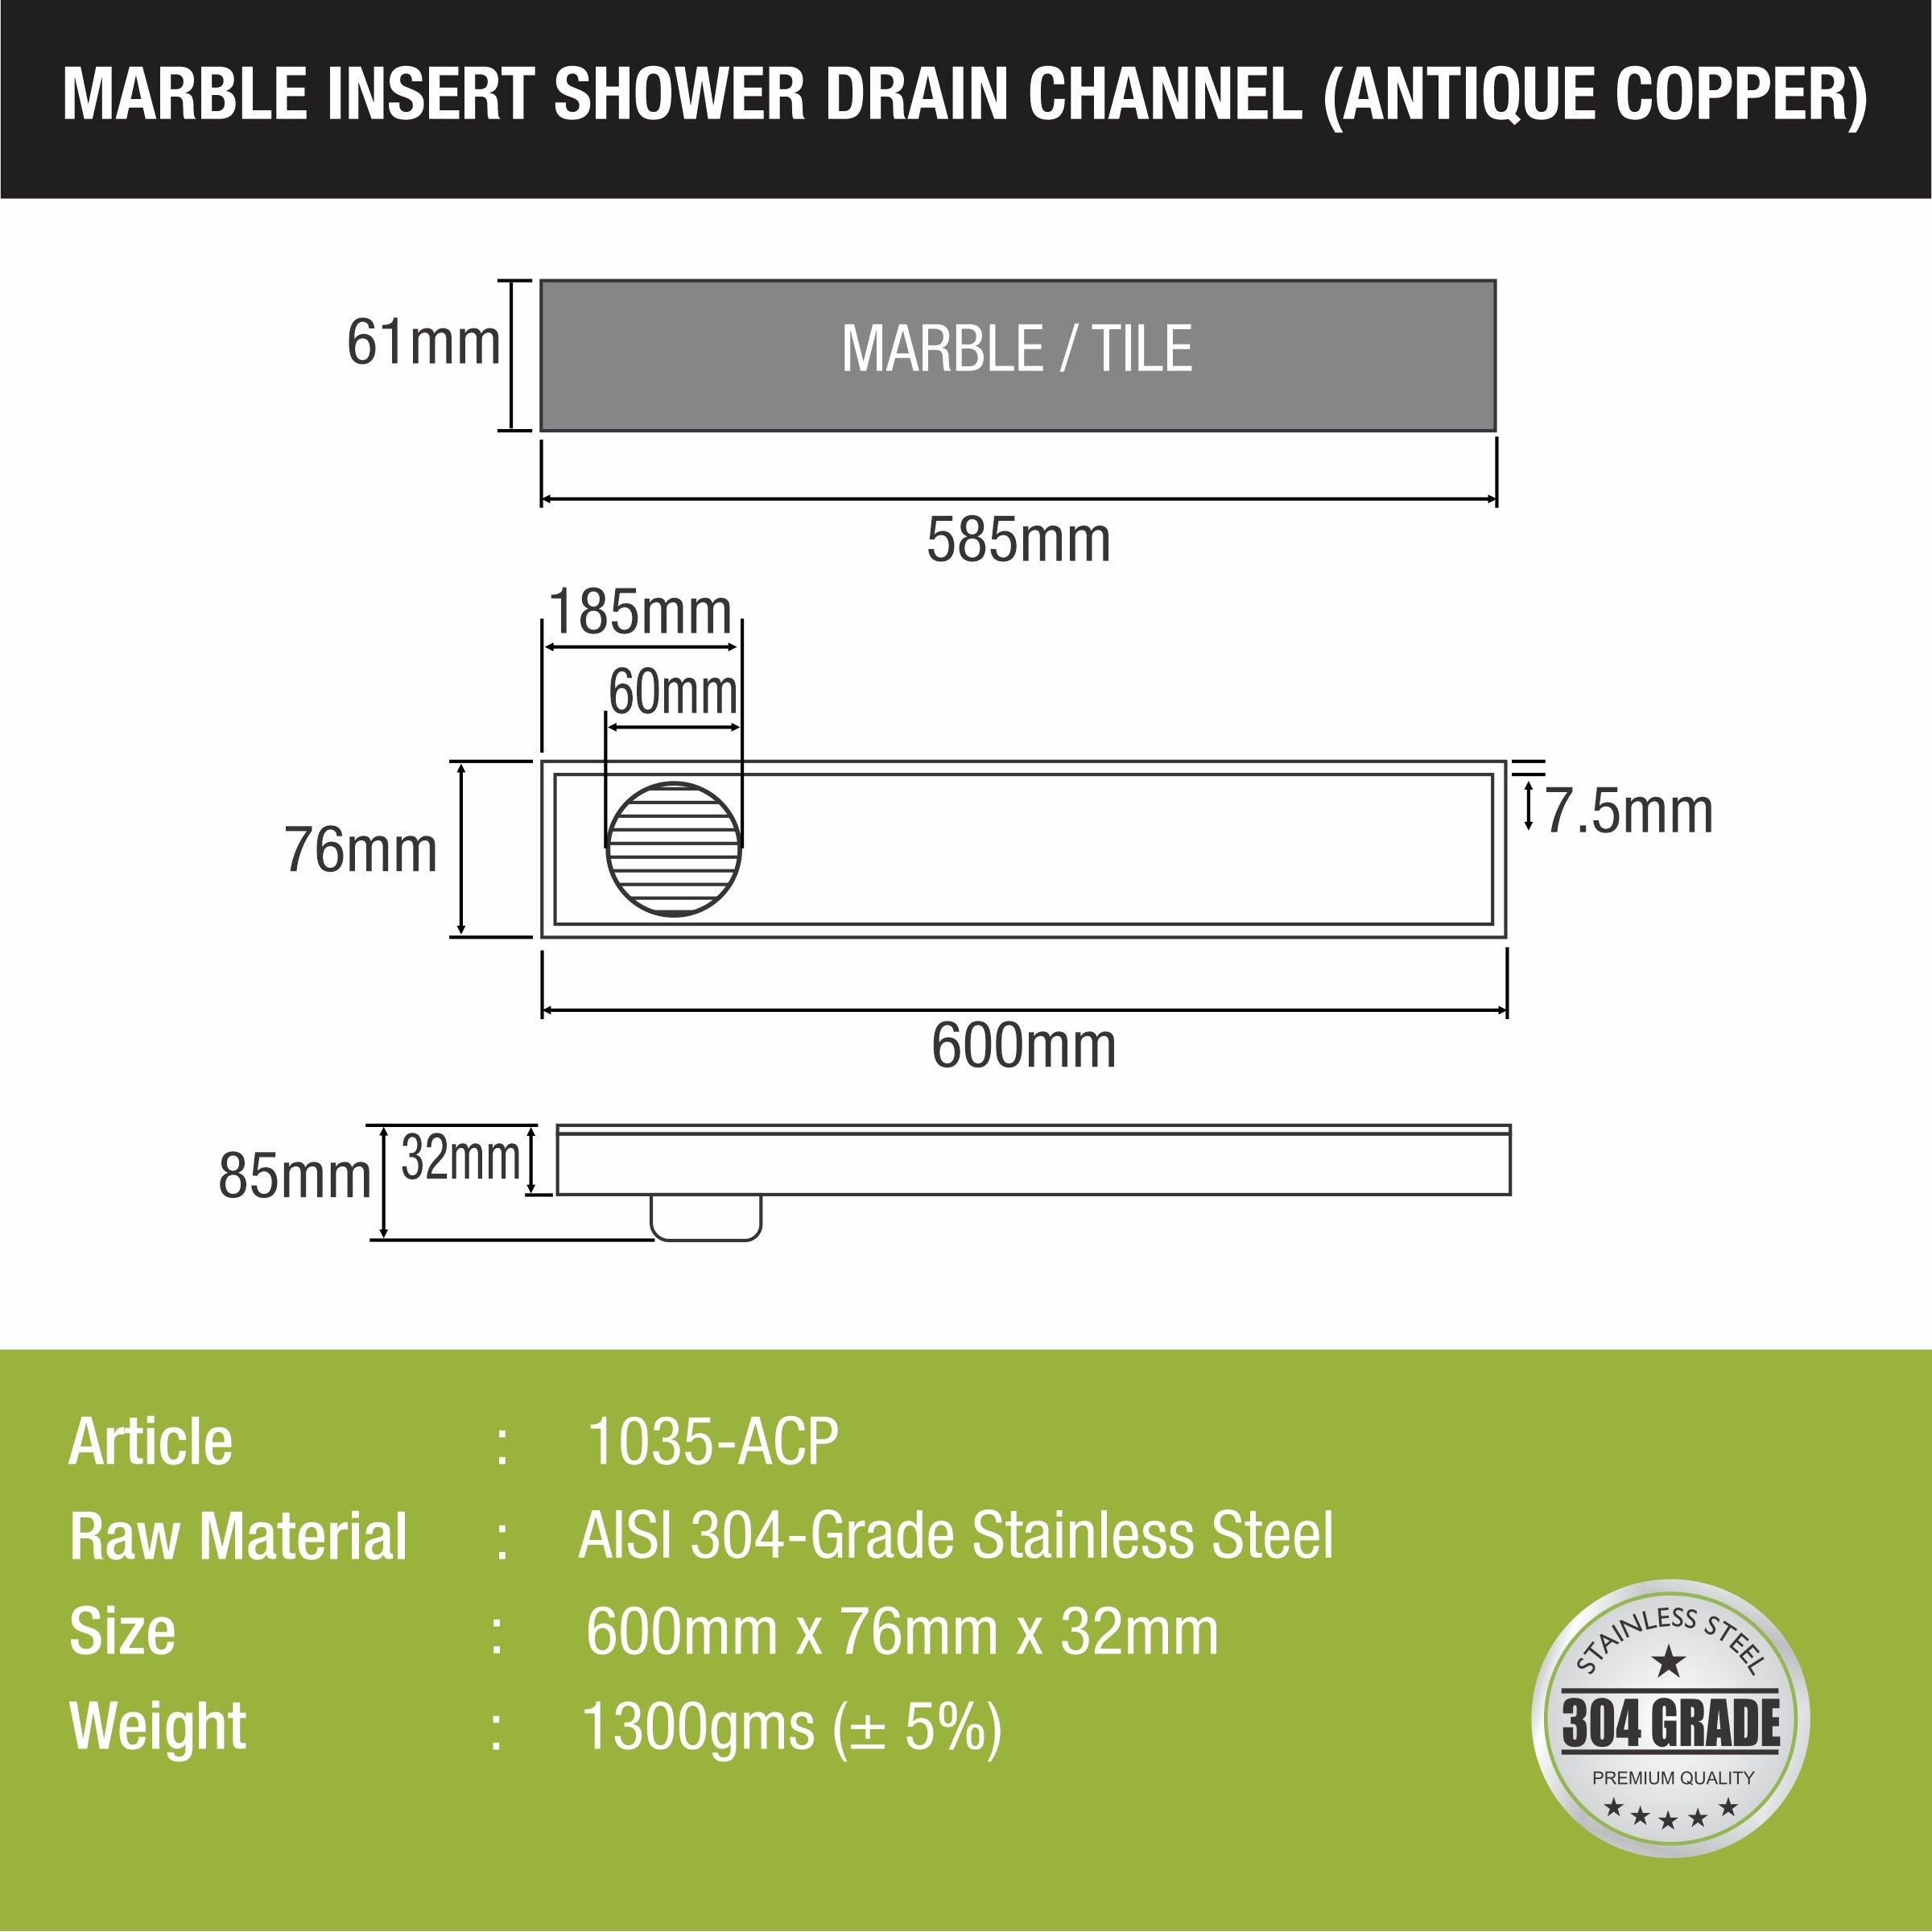 Marble Insert Shower Drain Channel - Antique Copper (24 x 3 Inches) sizes and dimensions